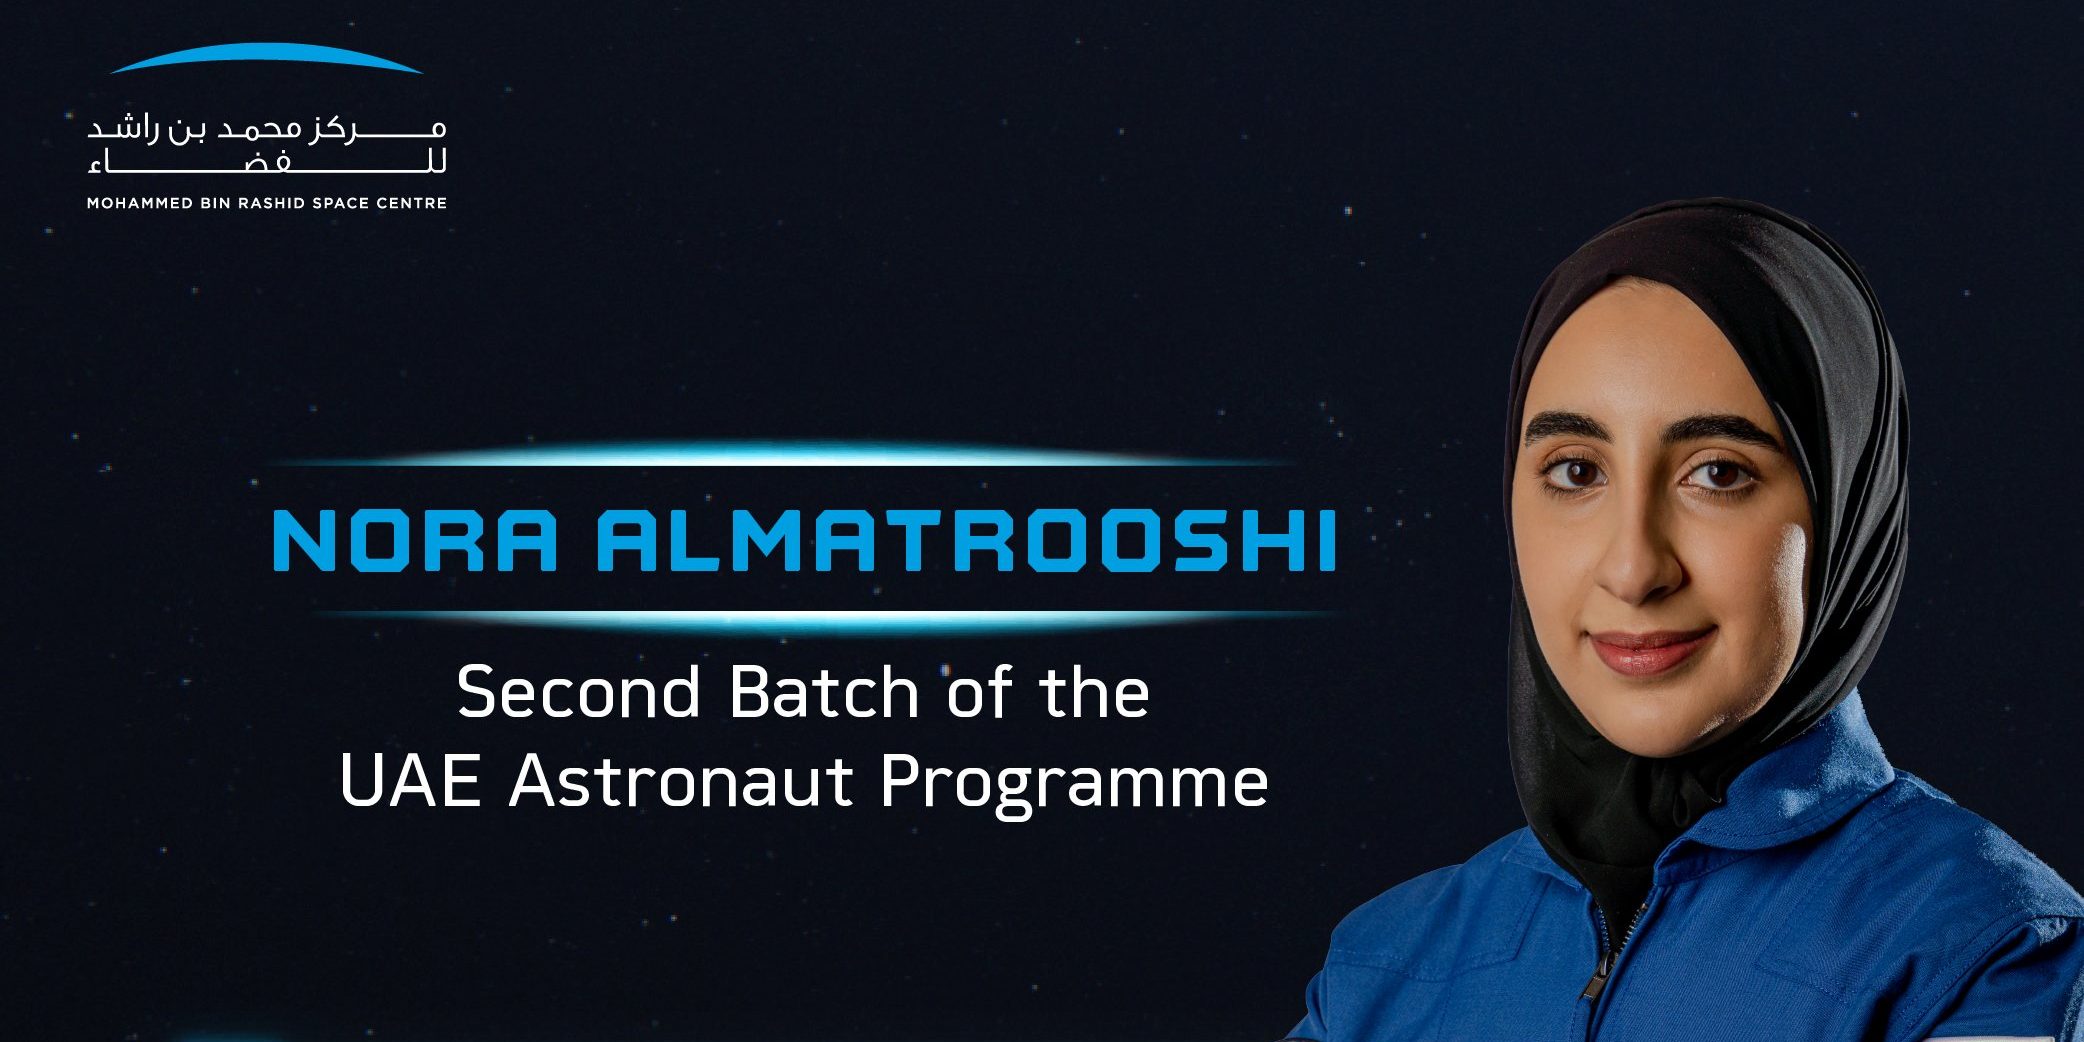 Image depicting first woman astronaut from UAE